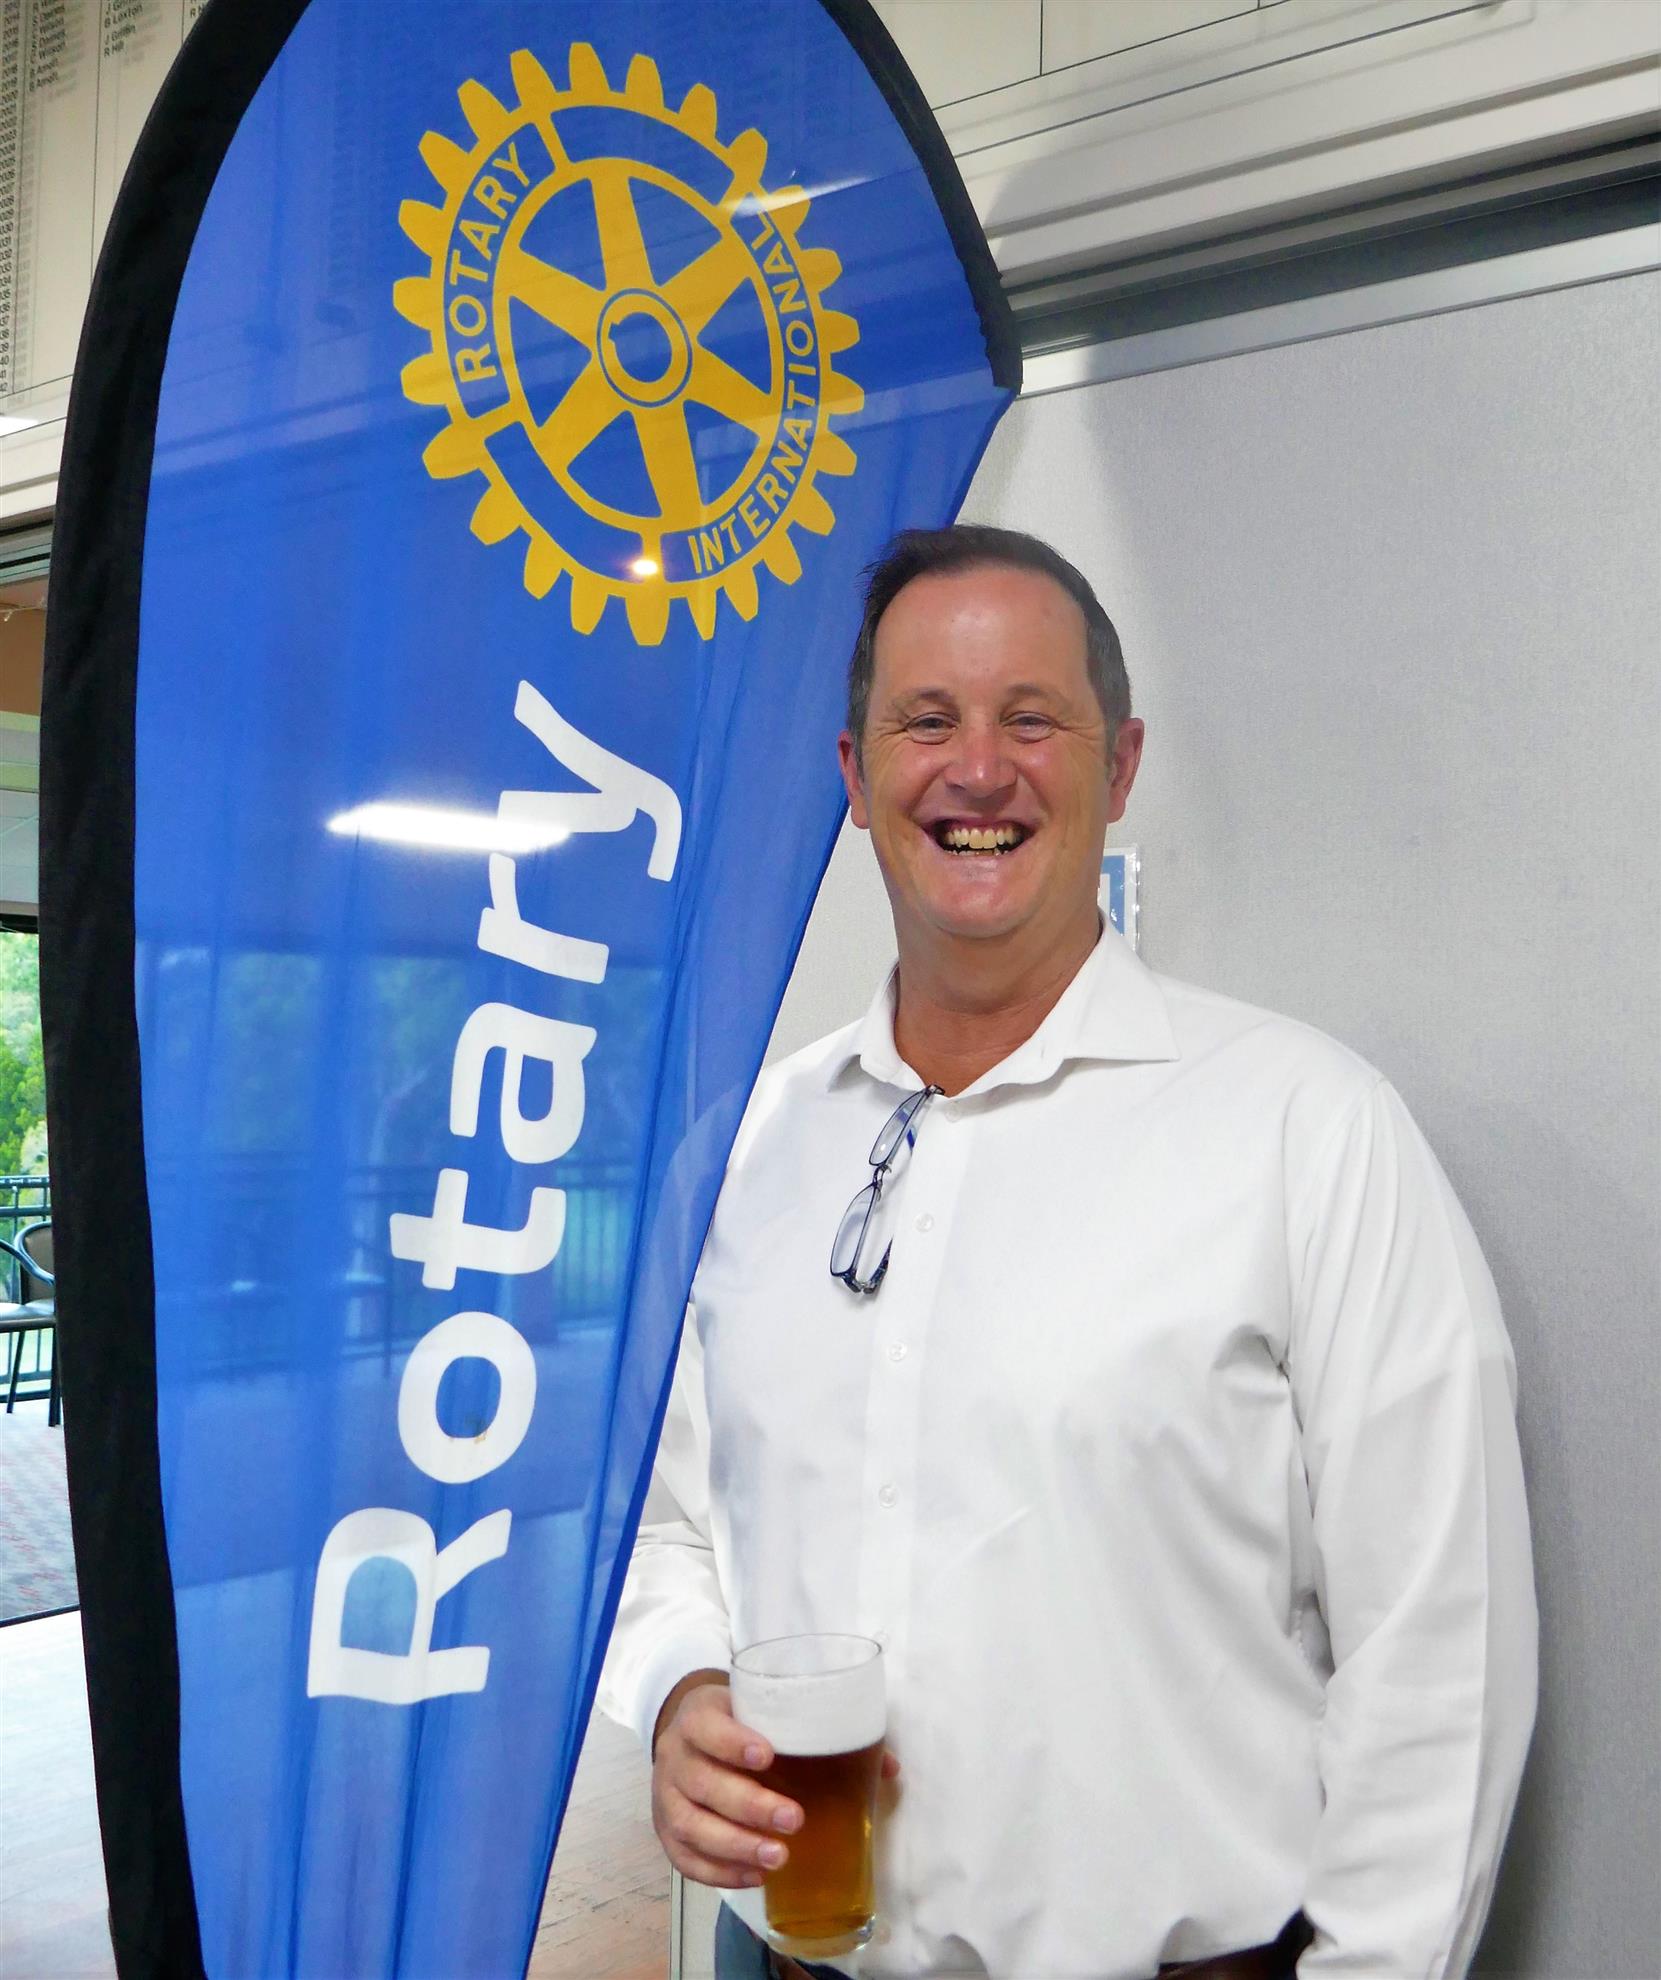 May be an image of one or more people, people standing and text that says "Caloundra Club Rotary AN Pacific of INDUCTION 대 Higgs Peter Rotary Opens sOpportunities Induction President Sreig"